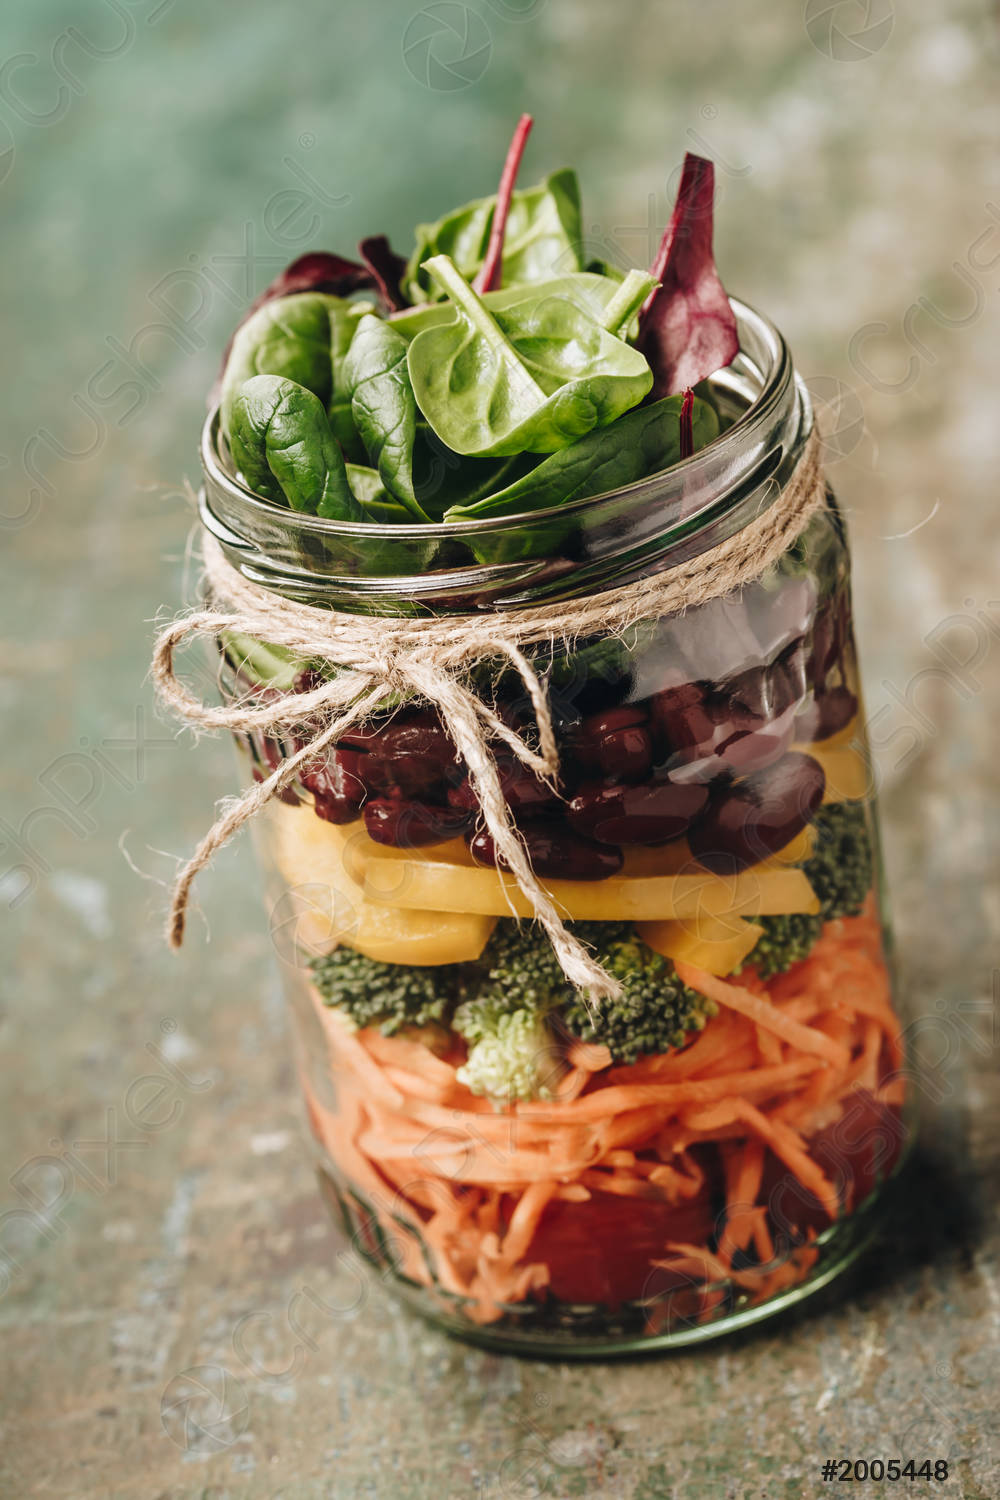 Mason Jar Salad with lettuce, olives, shredded carrots, peppers, and broccoli